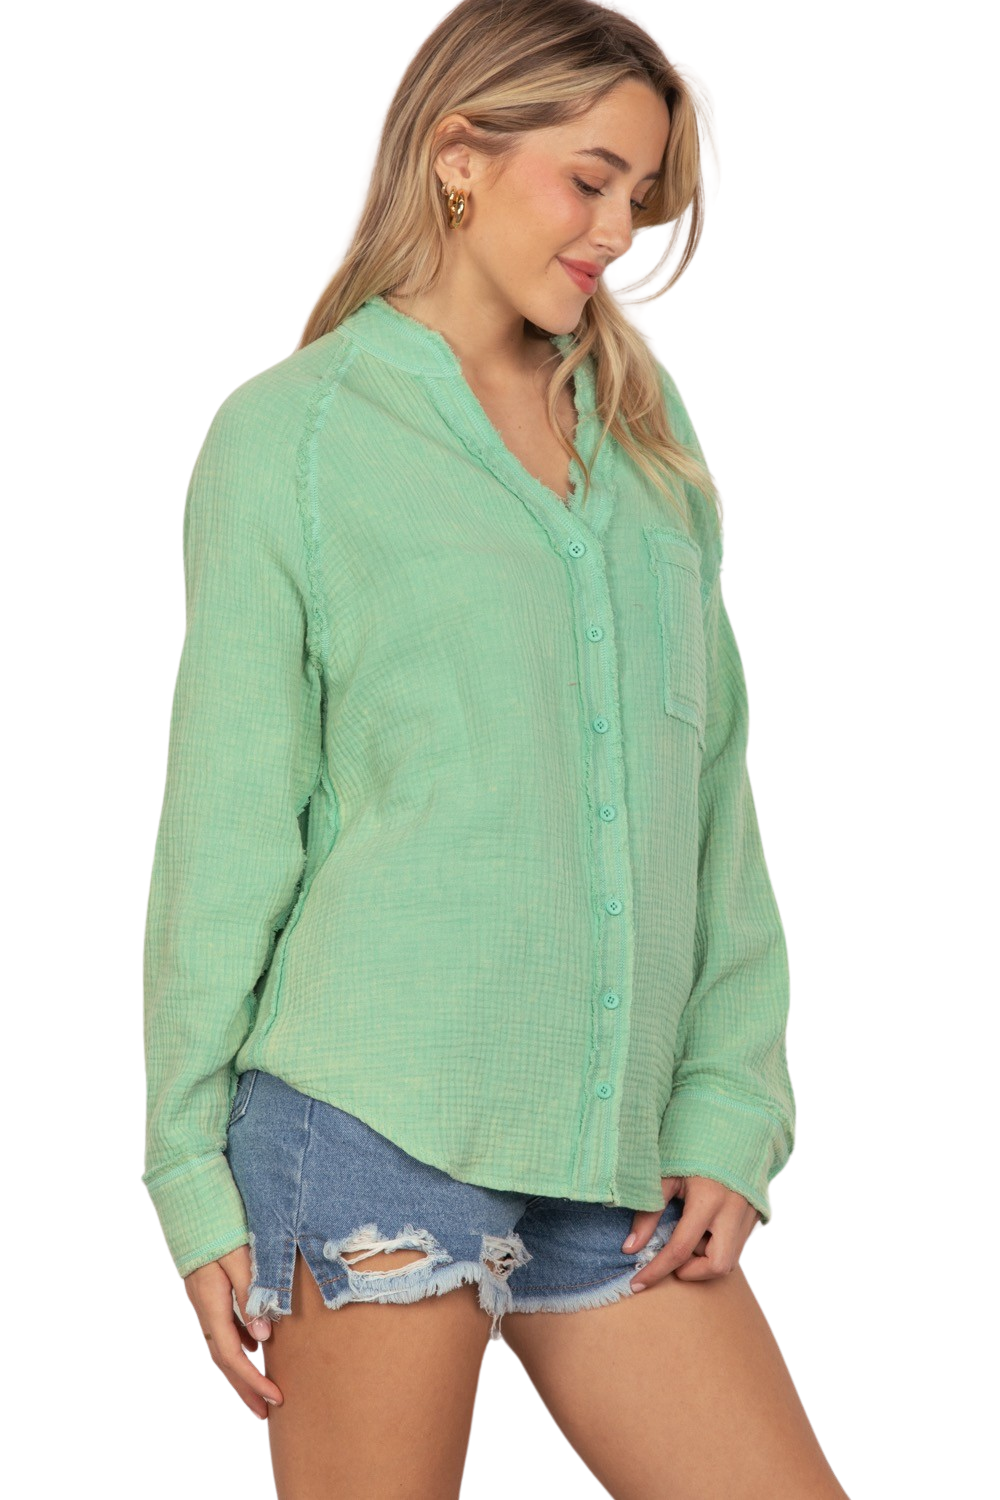 Beach Dreamer Teal Washed Woven Gauze Top